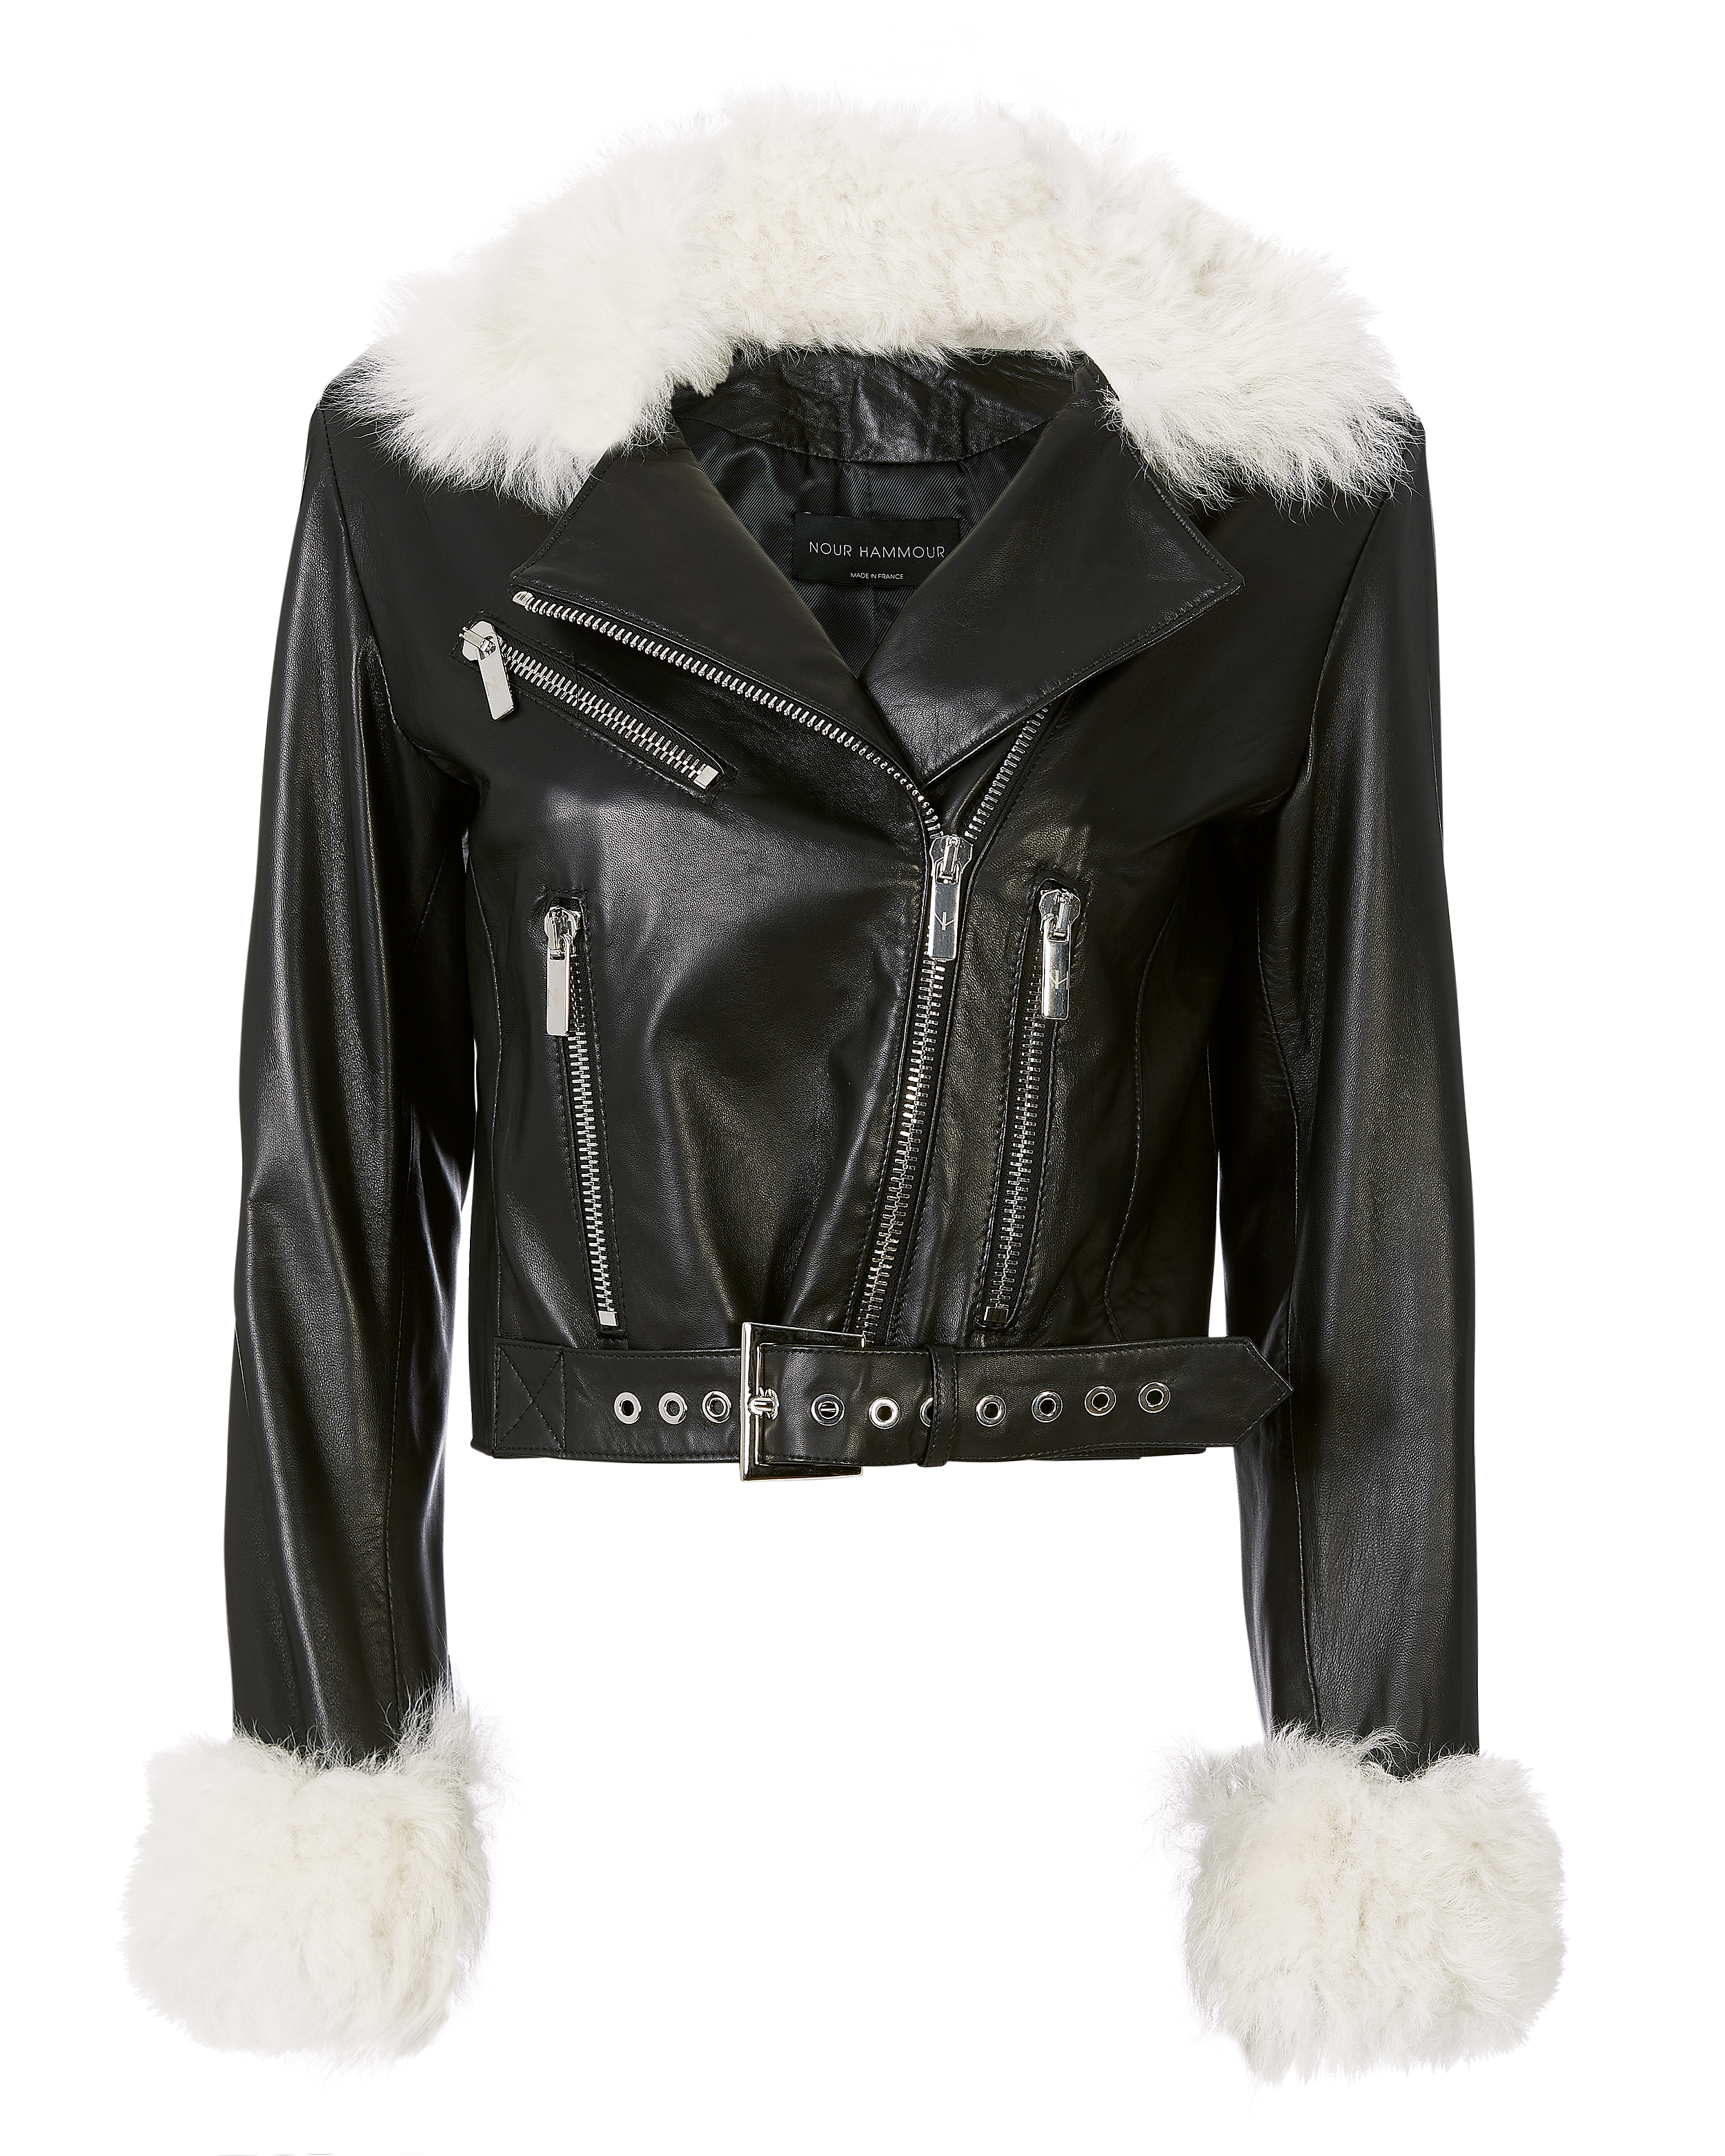 Nour Hammour White Shearling Trim Leather Jacket in black | INTERMIX®